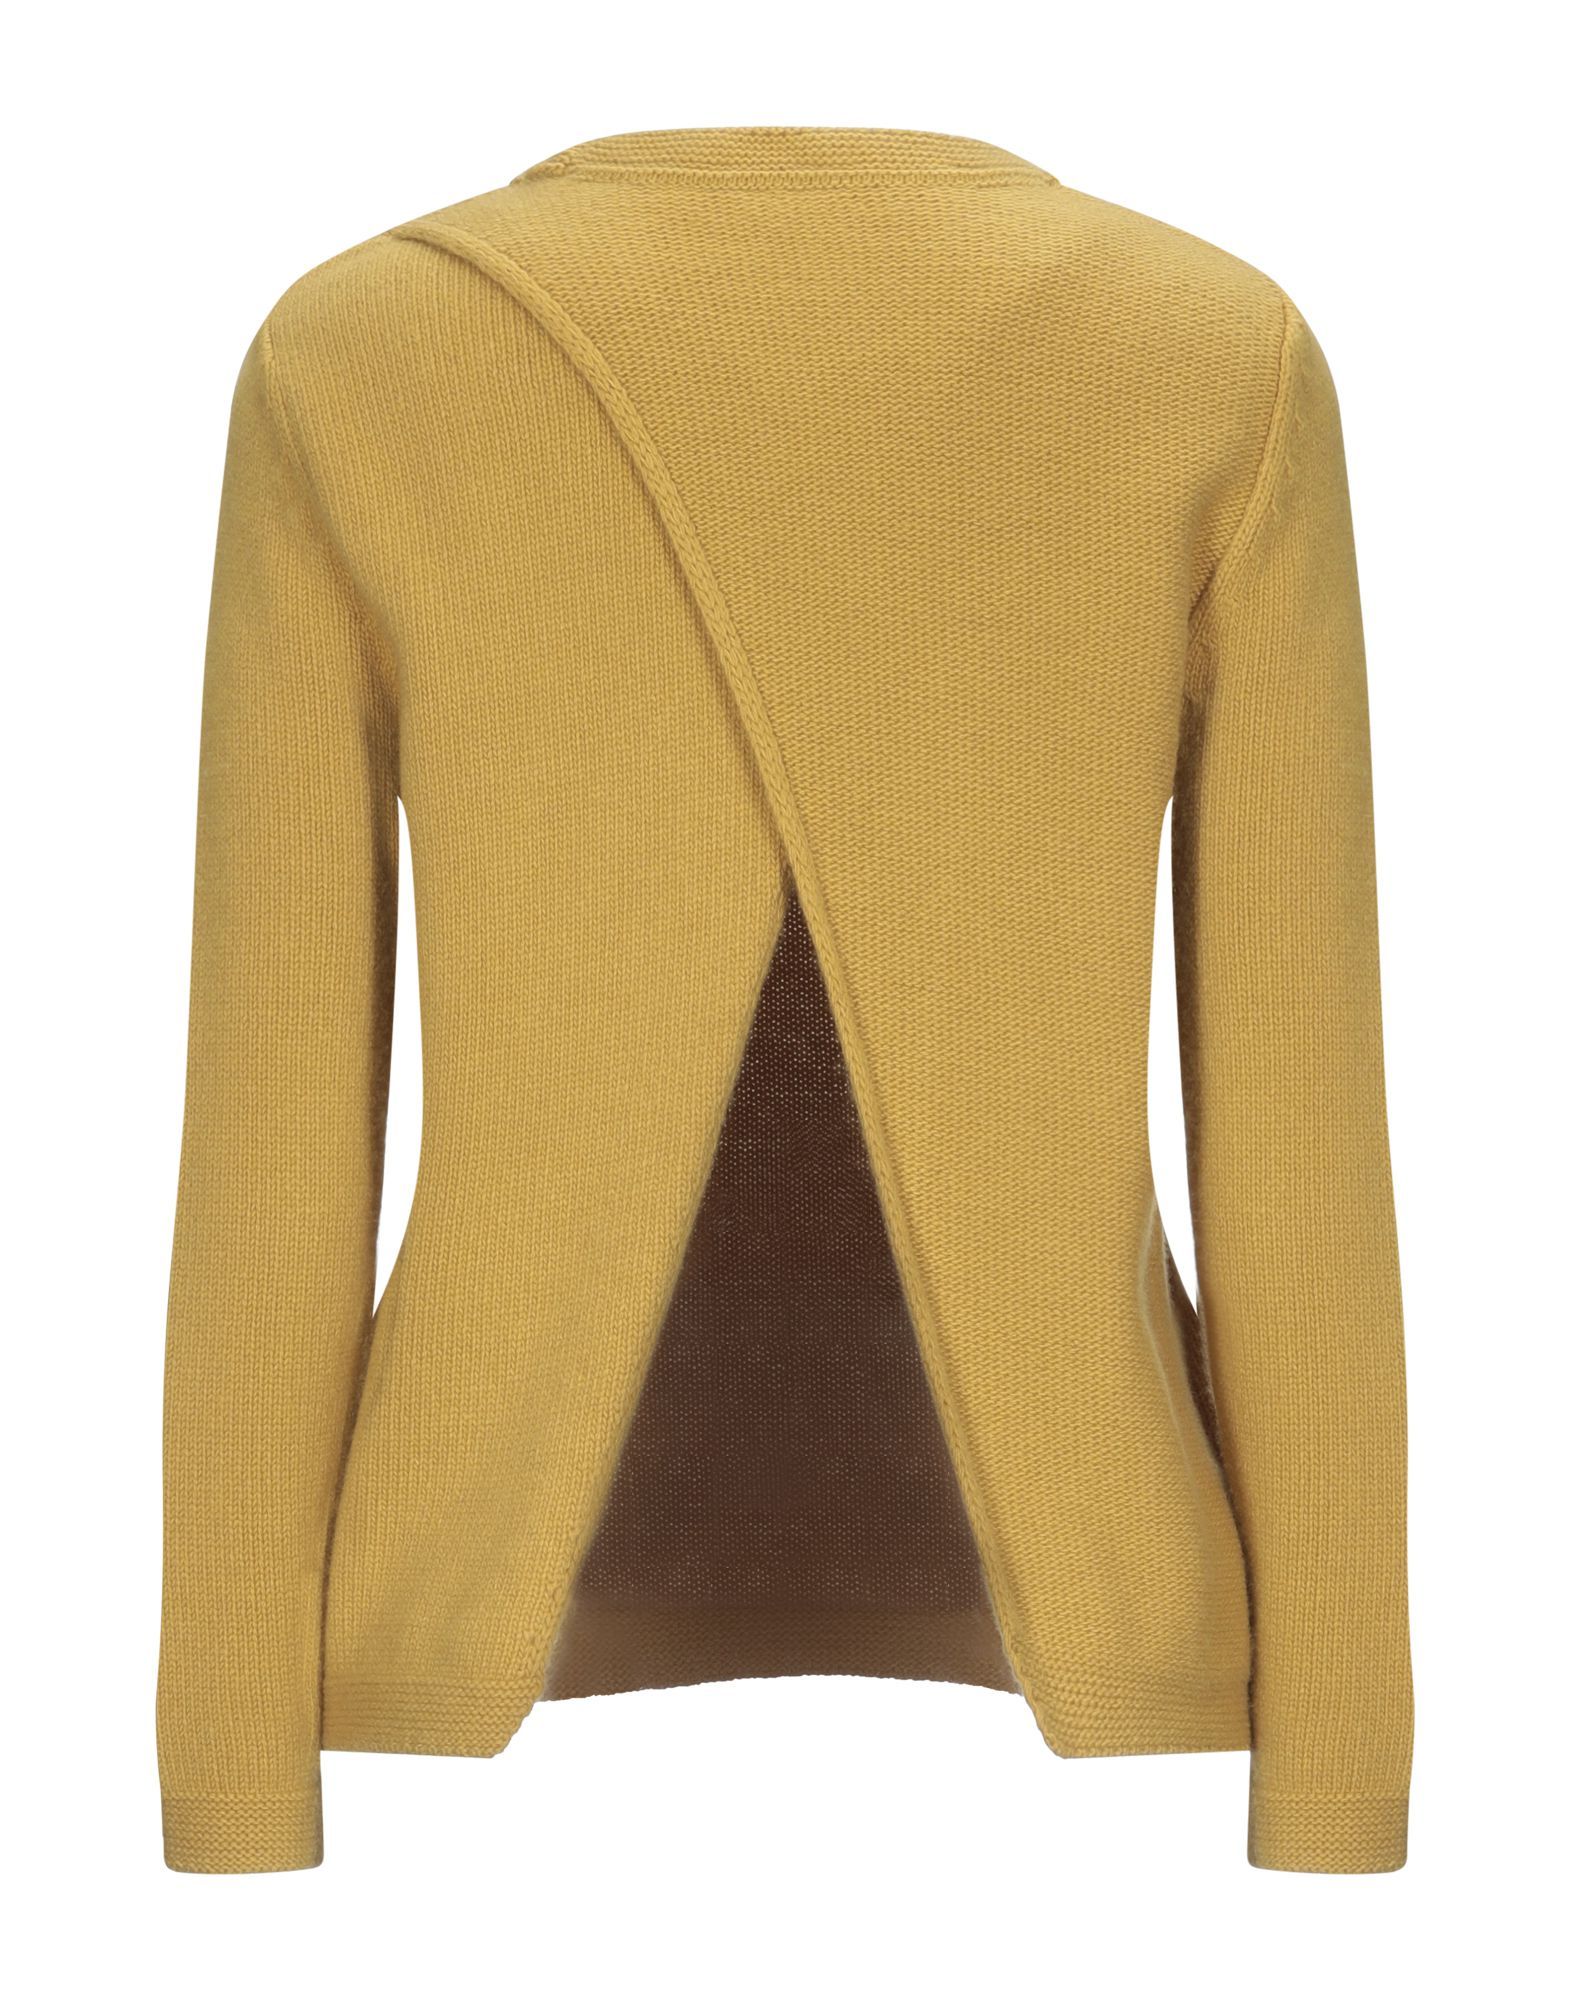 knitted, no appliqués, medium-weight knit, round collar, basic solid colour, long sleeves, no pockets